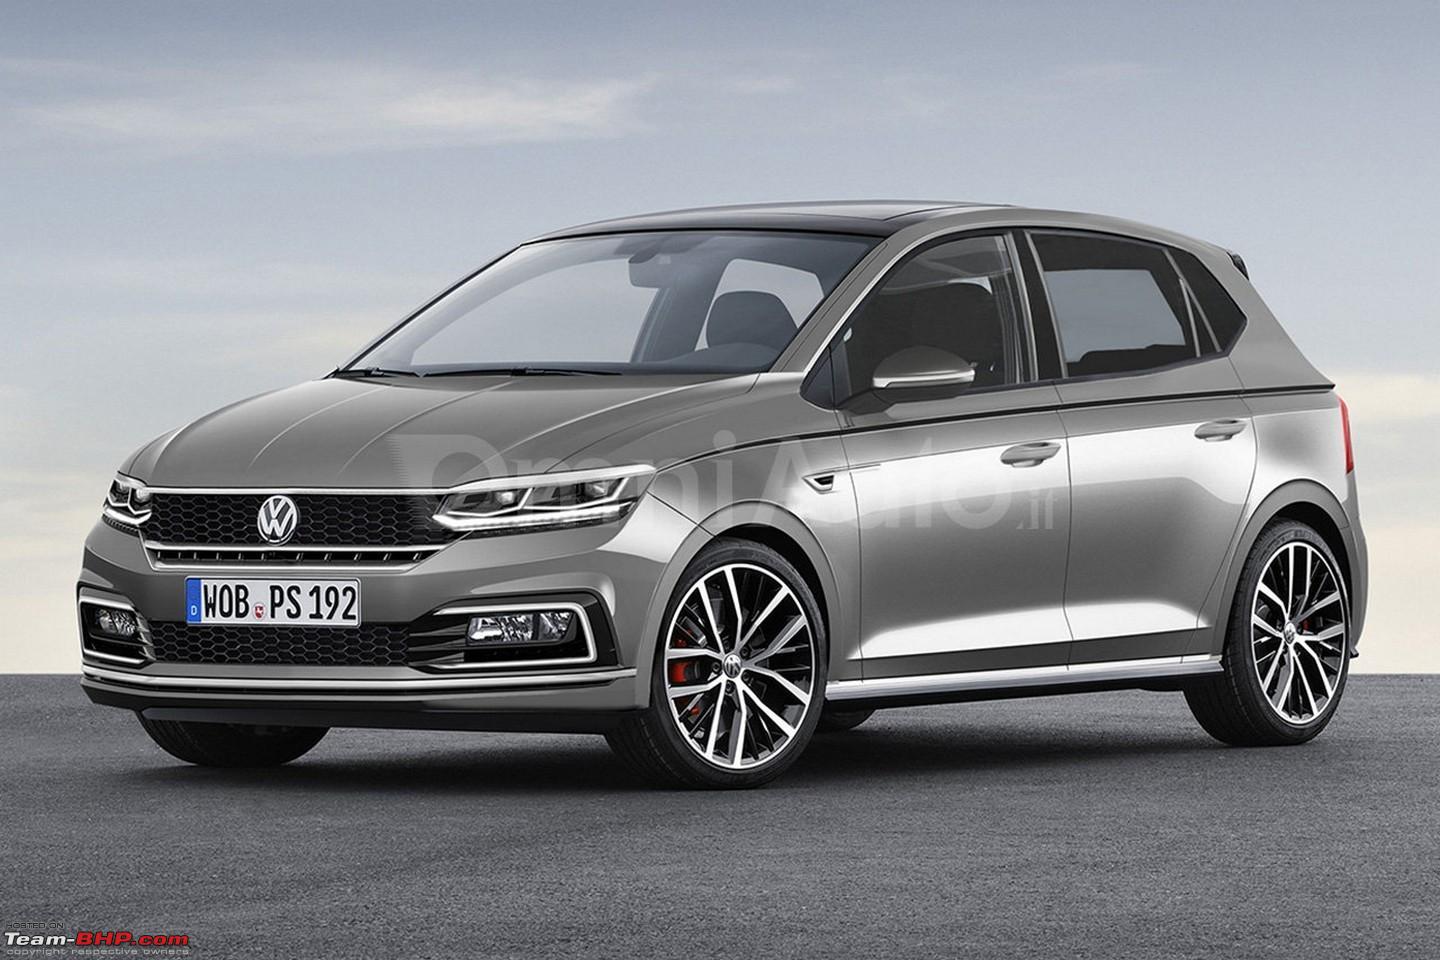 Details of the Volkswagen Polo EDIT: Unveiled Berlin - Team-BHP